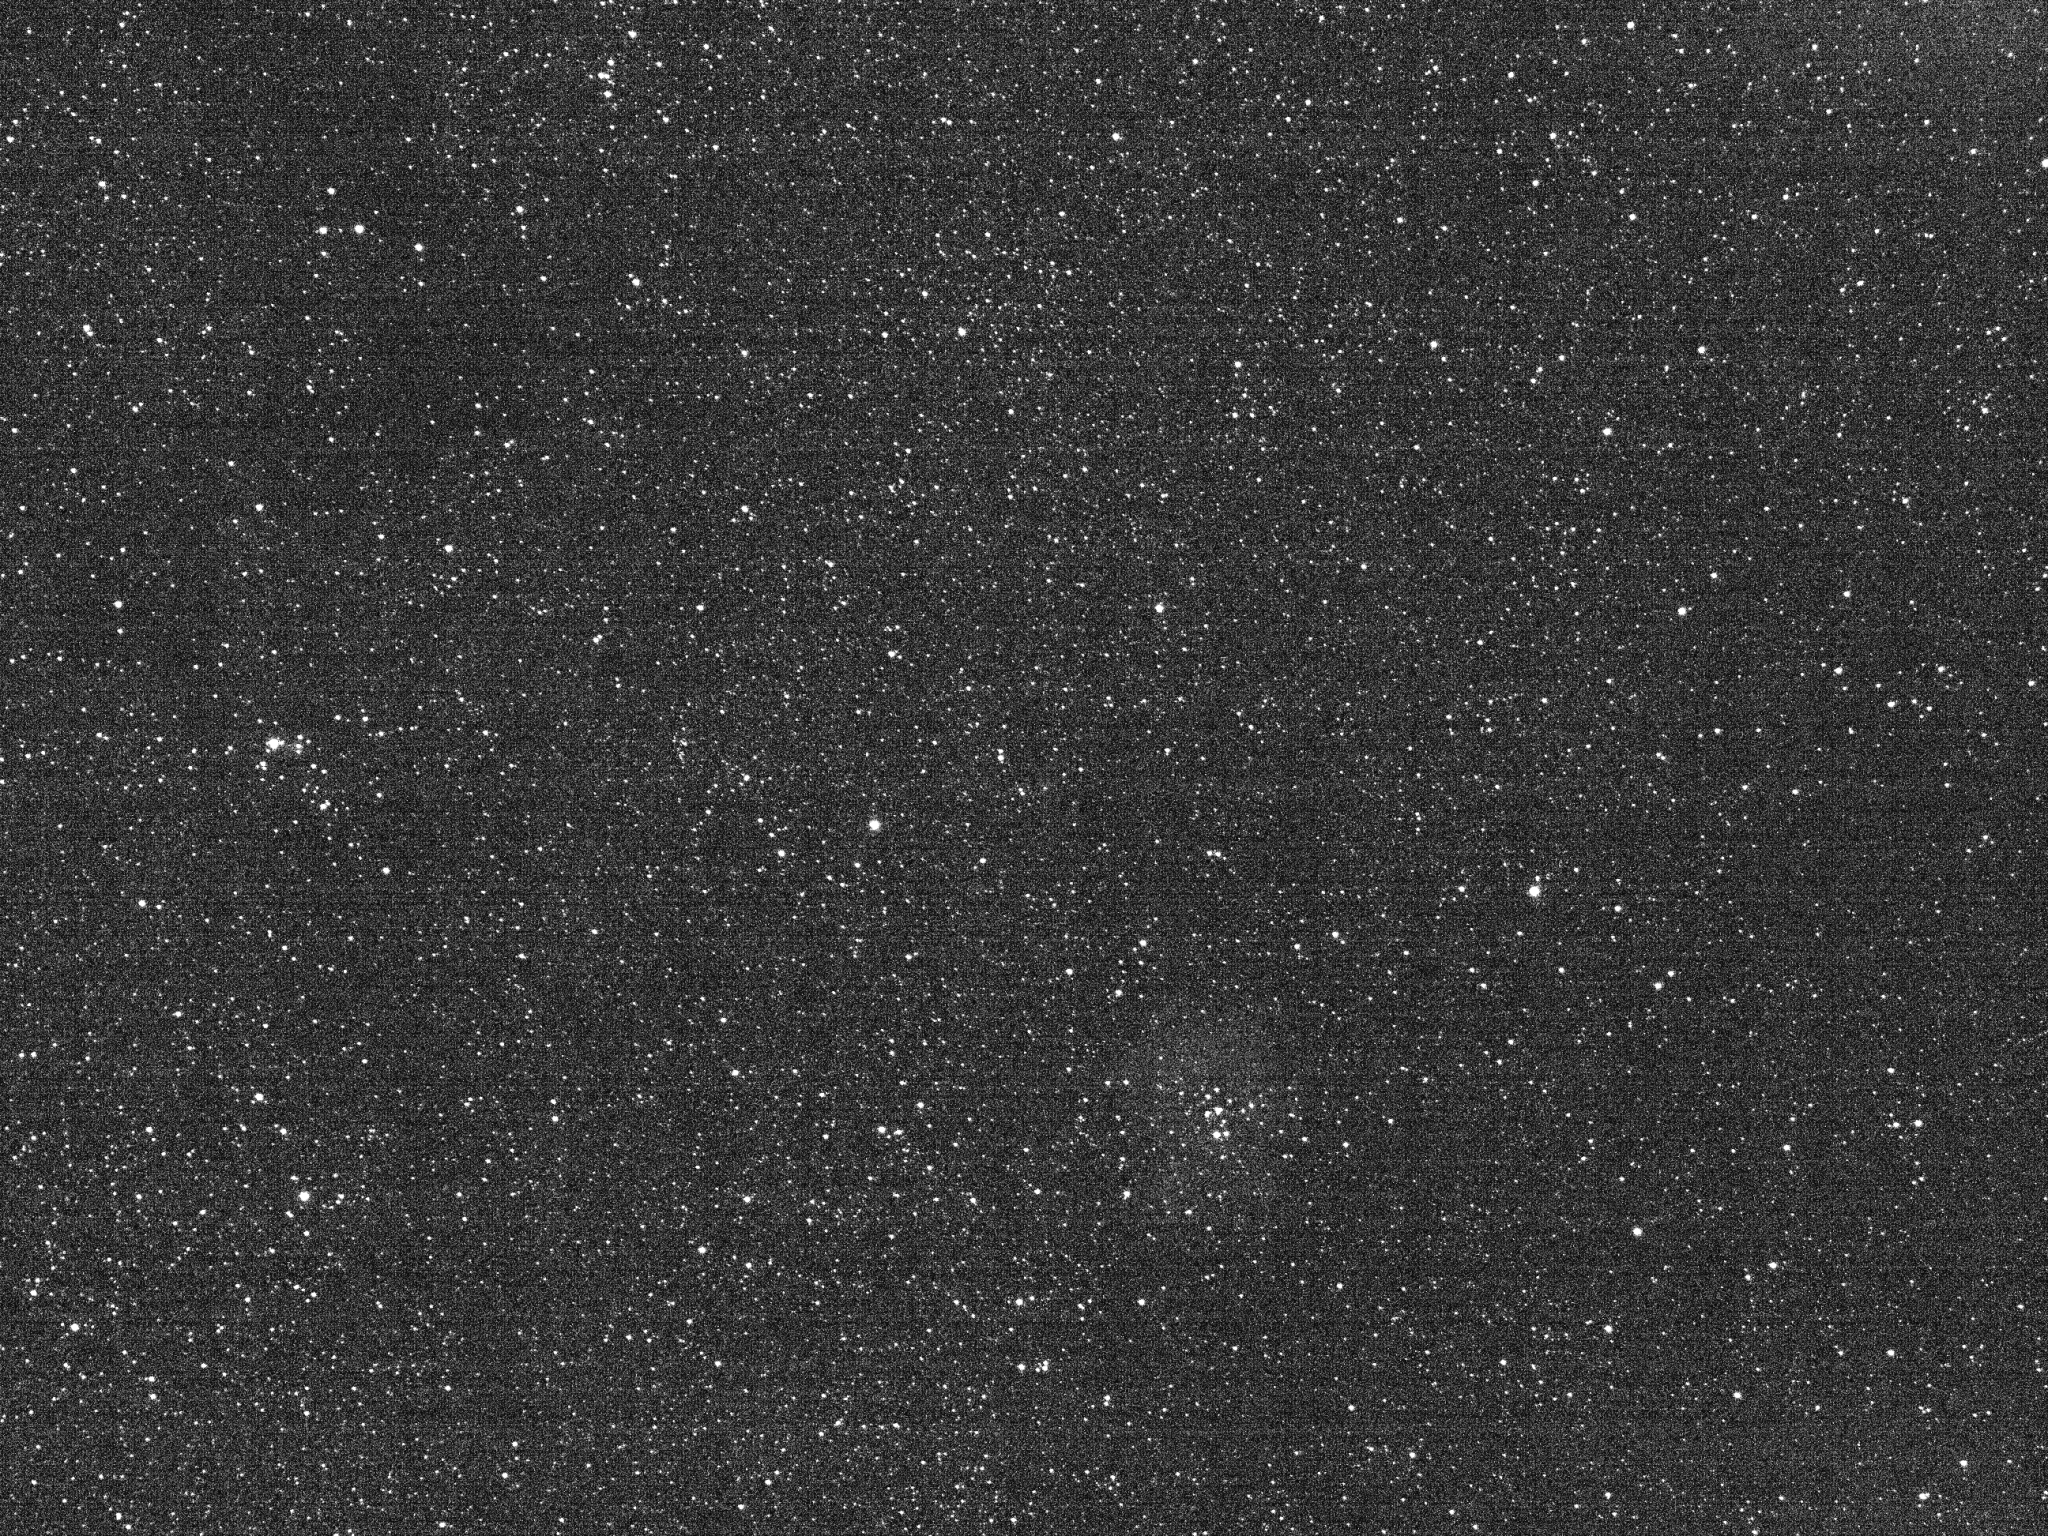 Grainy black-and-white view of stars filling the entire frame.